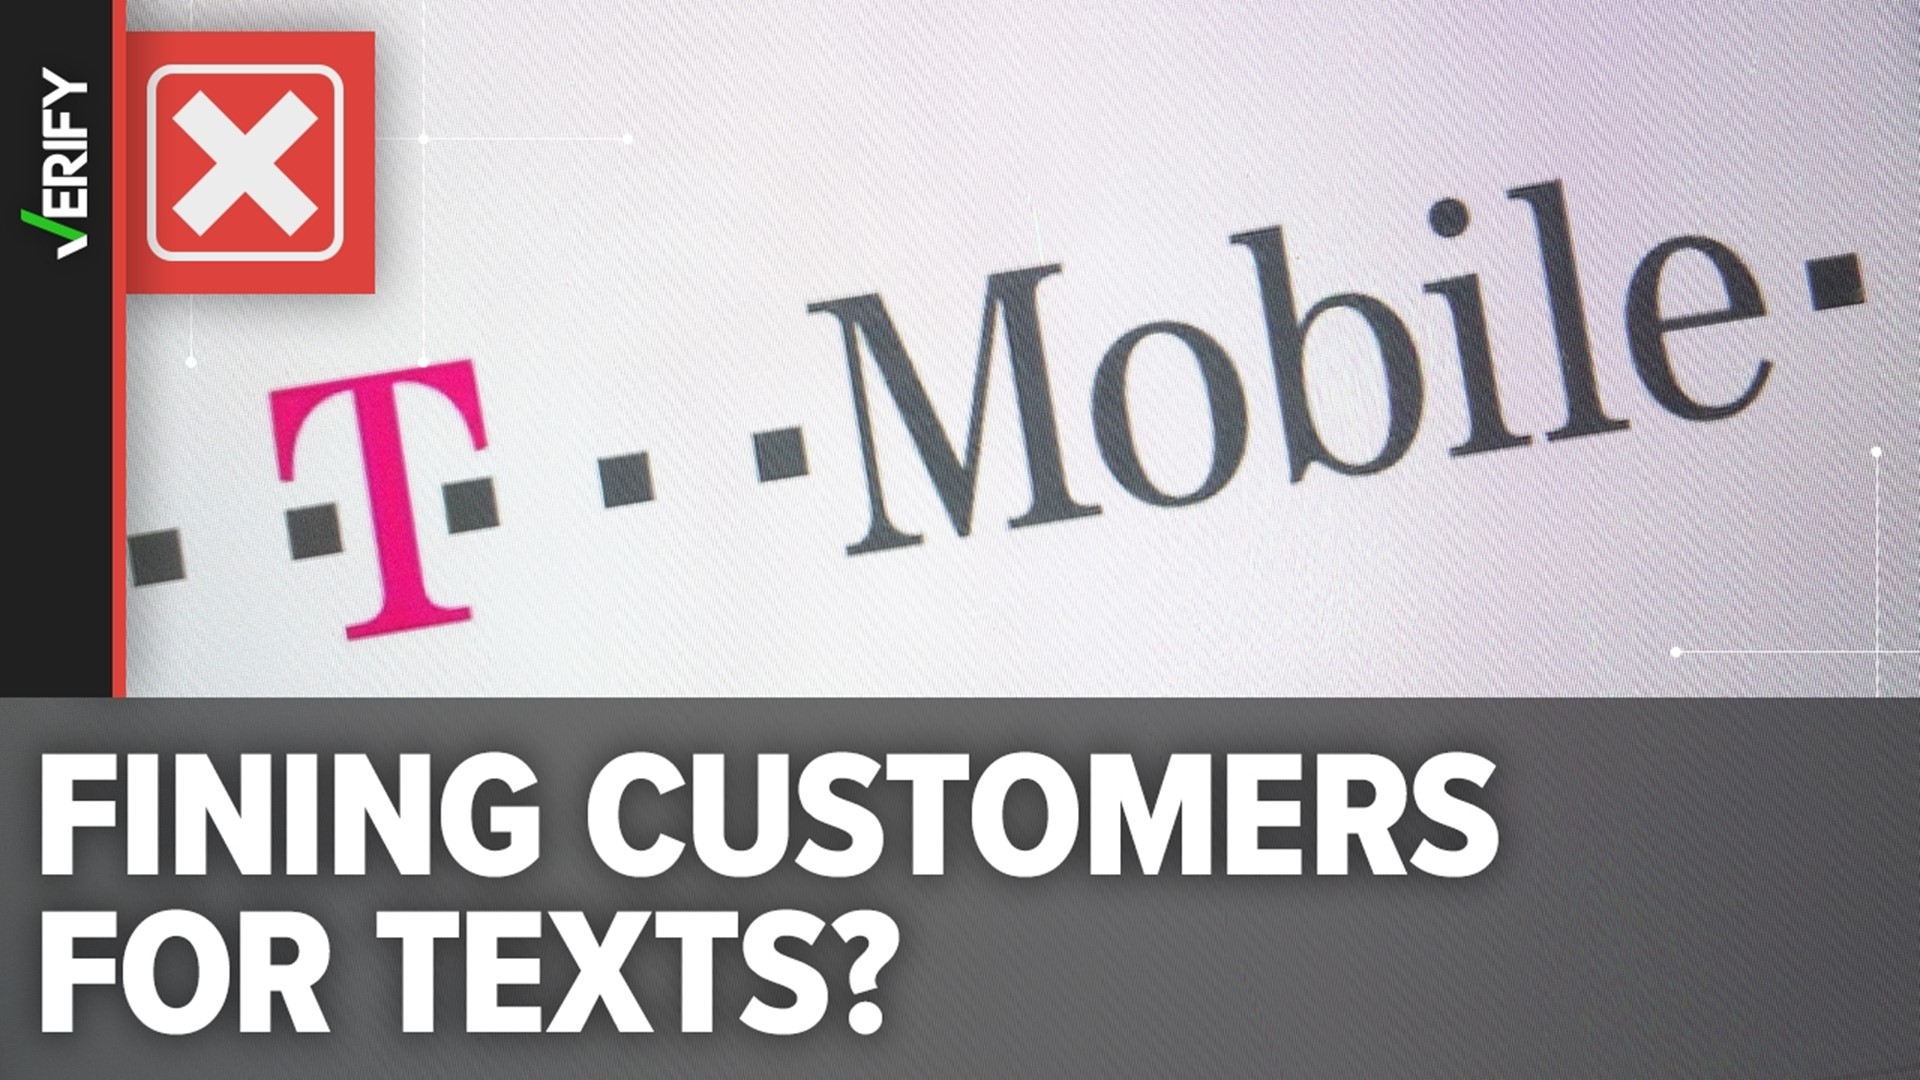 T-Mobile’s updated policy to fine for illegal or inappropriate text messages only applies to third-party companies who send mass marketing campaigns.